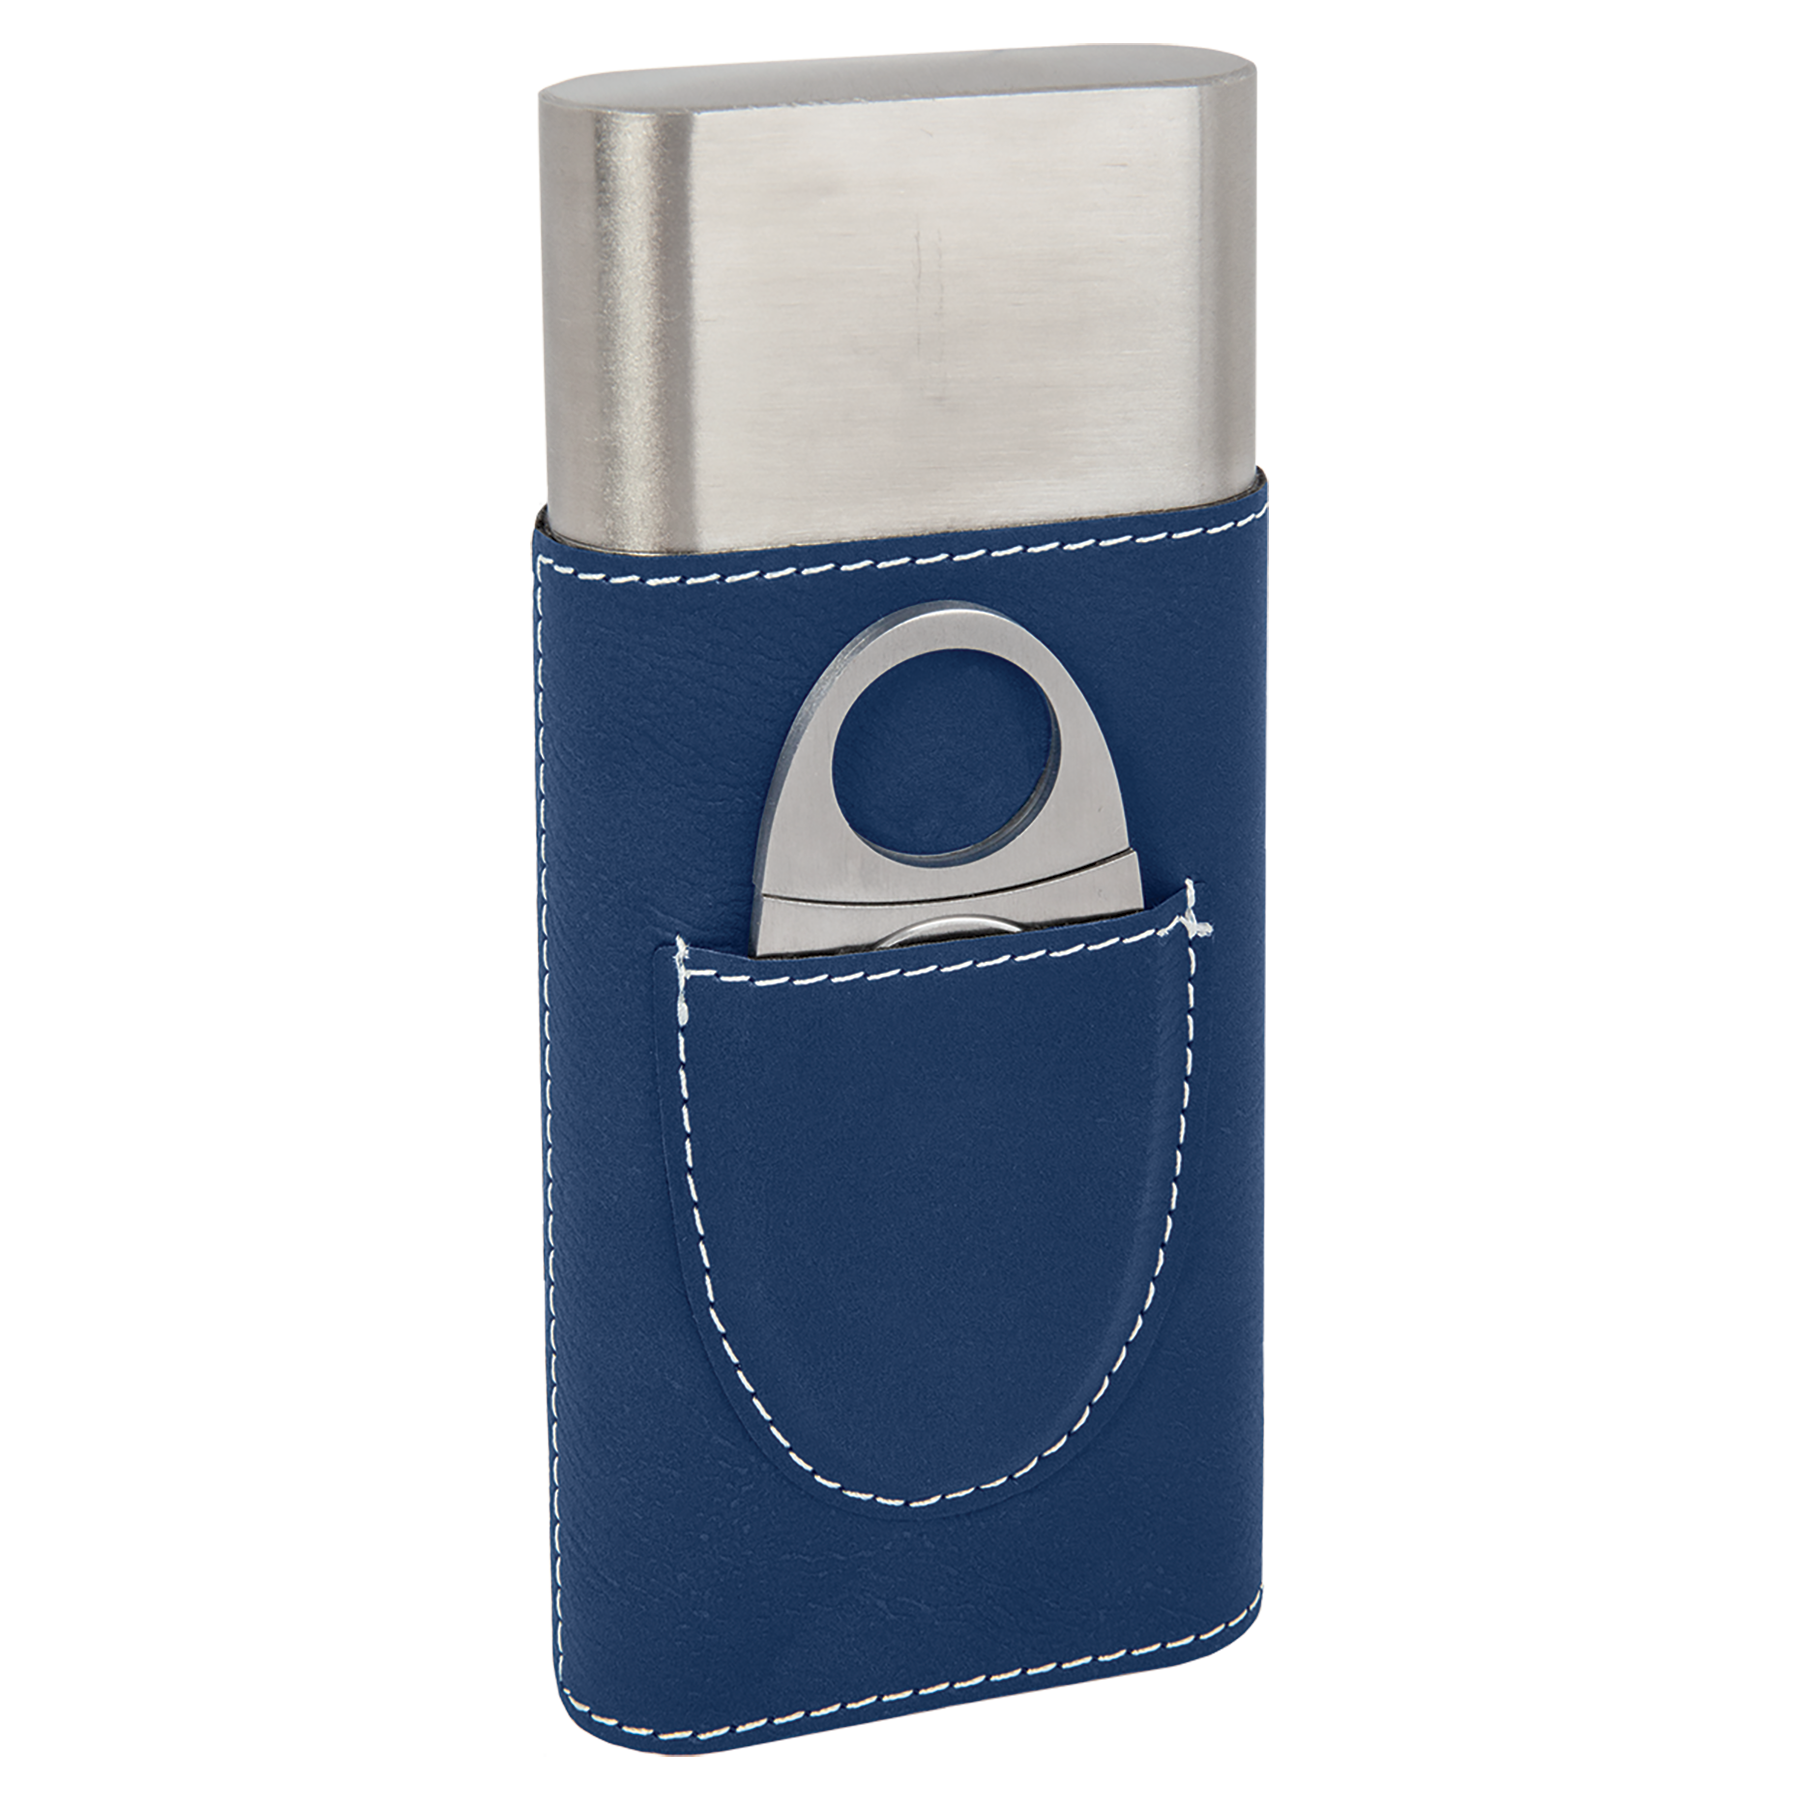 Engravable Blue to Silver Leatherette Cigar Case-Personalized Cigar Case -Water Resistant -Stainless Steel -Cutter Included (cuts up to 7/8") -Holds Up to 3 Cigars-Great Gift for Groom & Groomsman